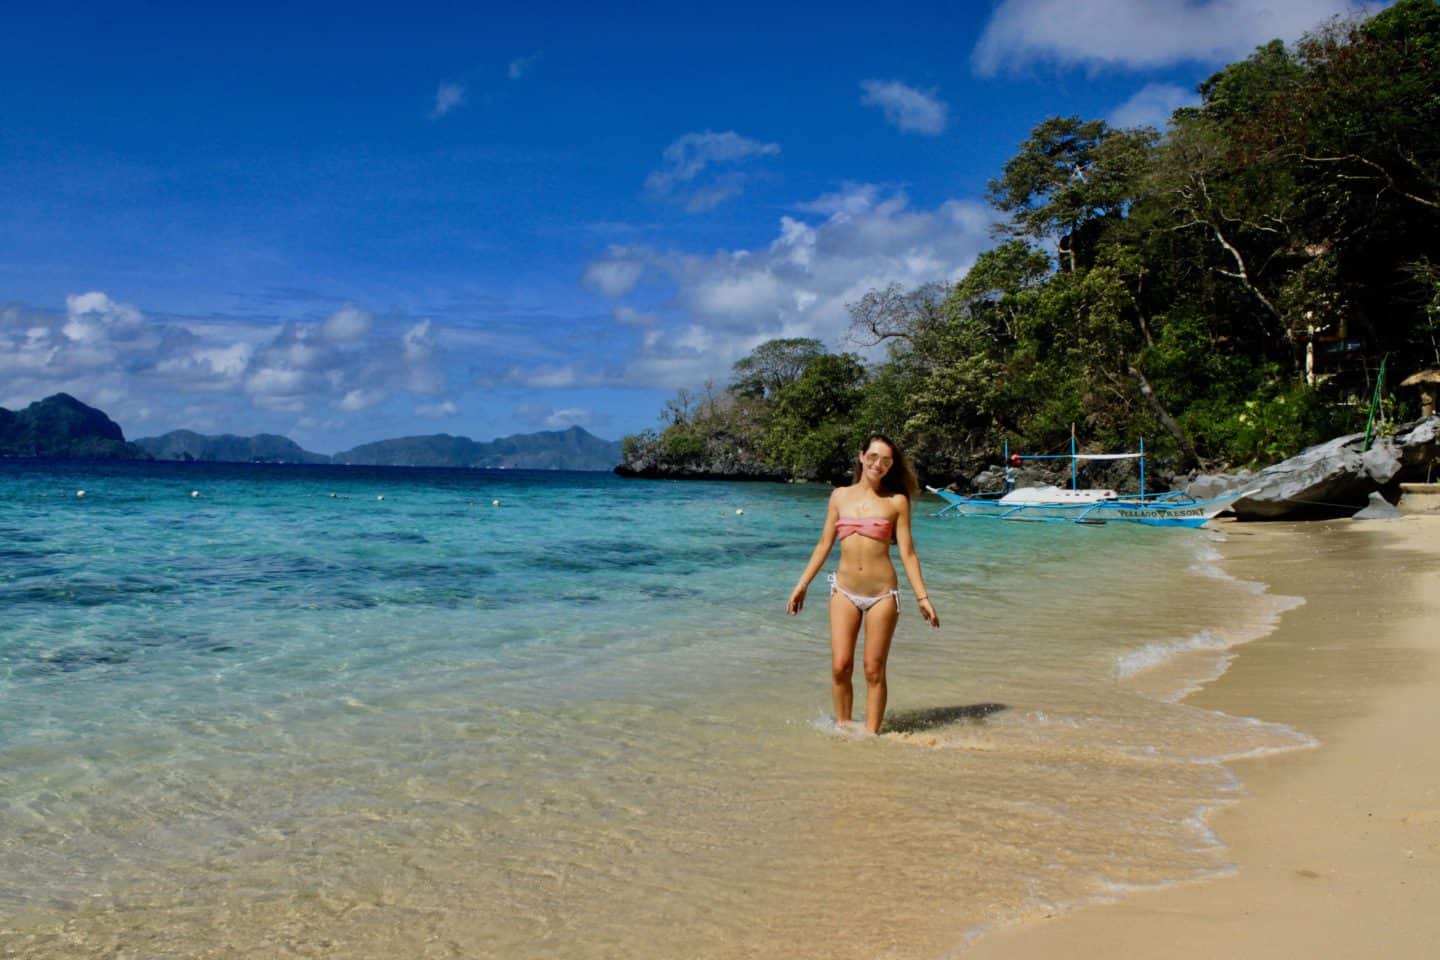 Glorious weather in El Nido in the Philippines